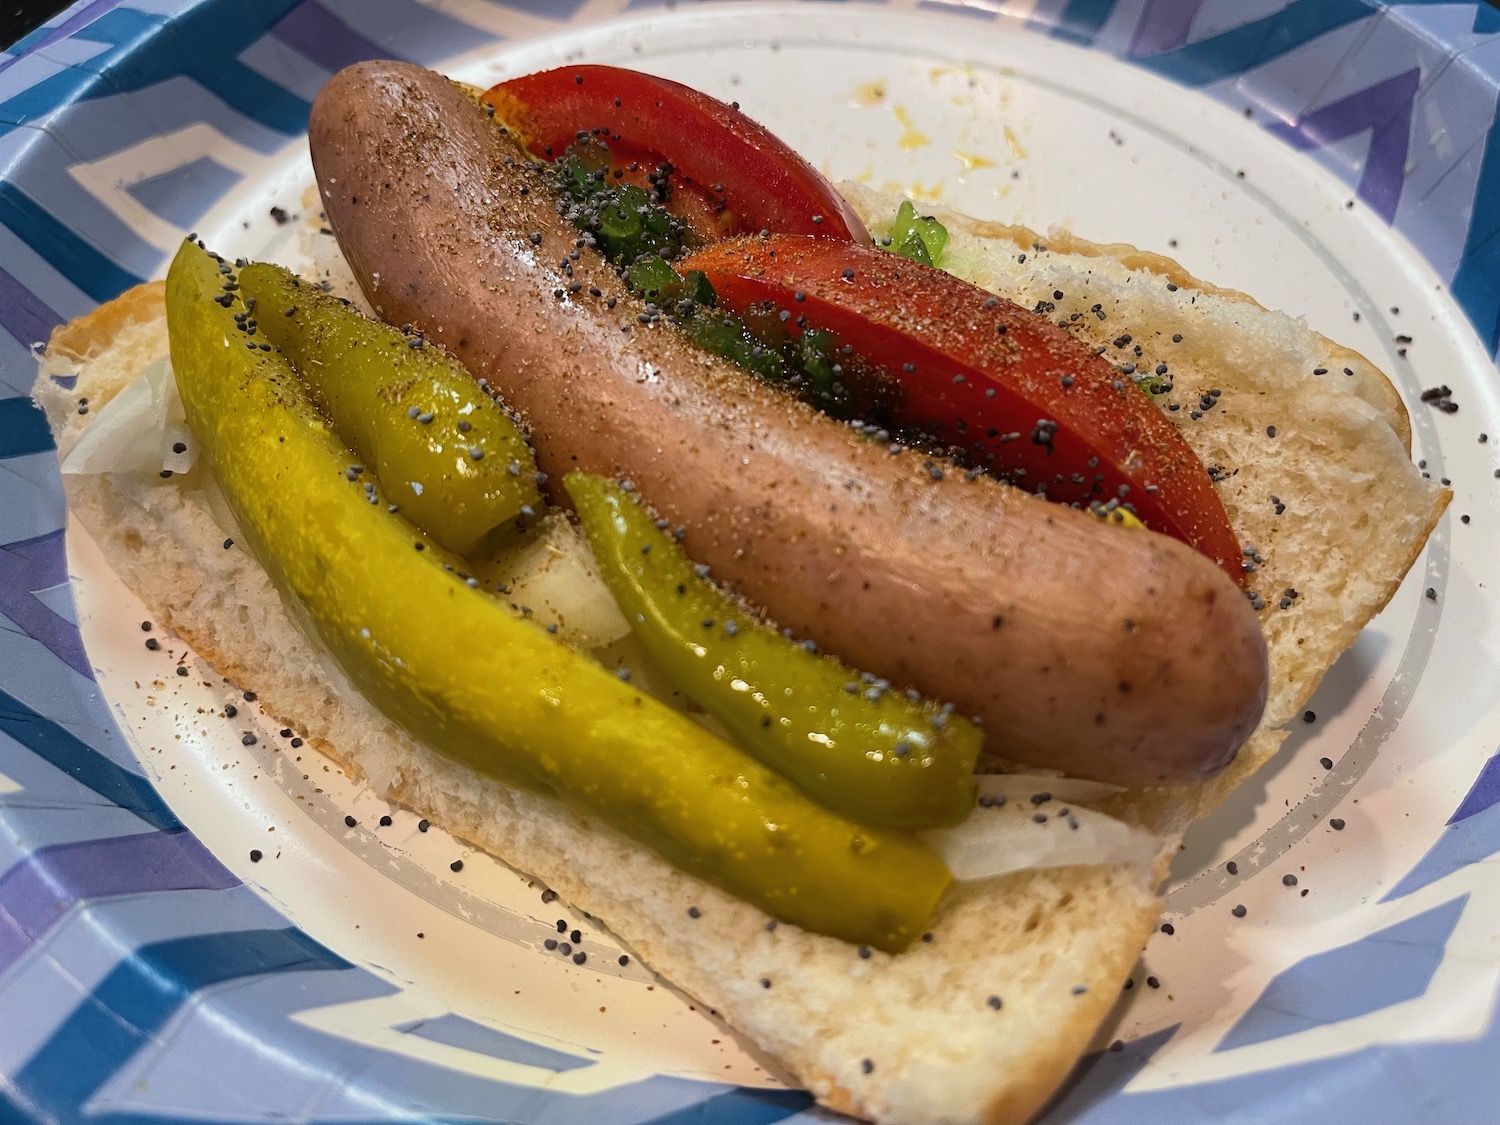 a hot dog sandwich with tomatoes and pickles on a plate